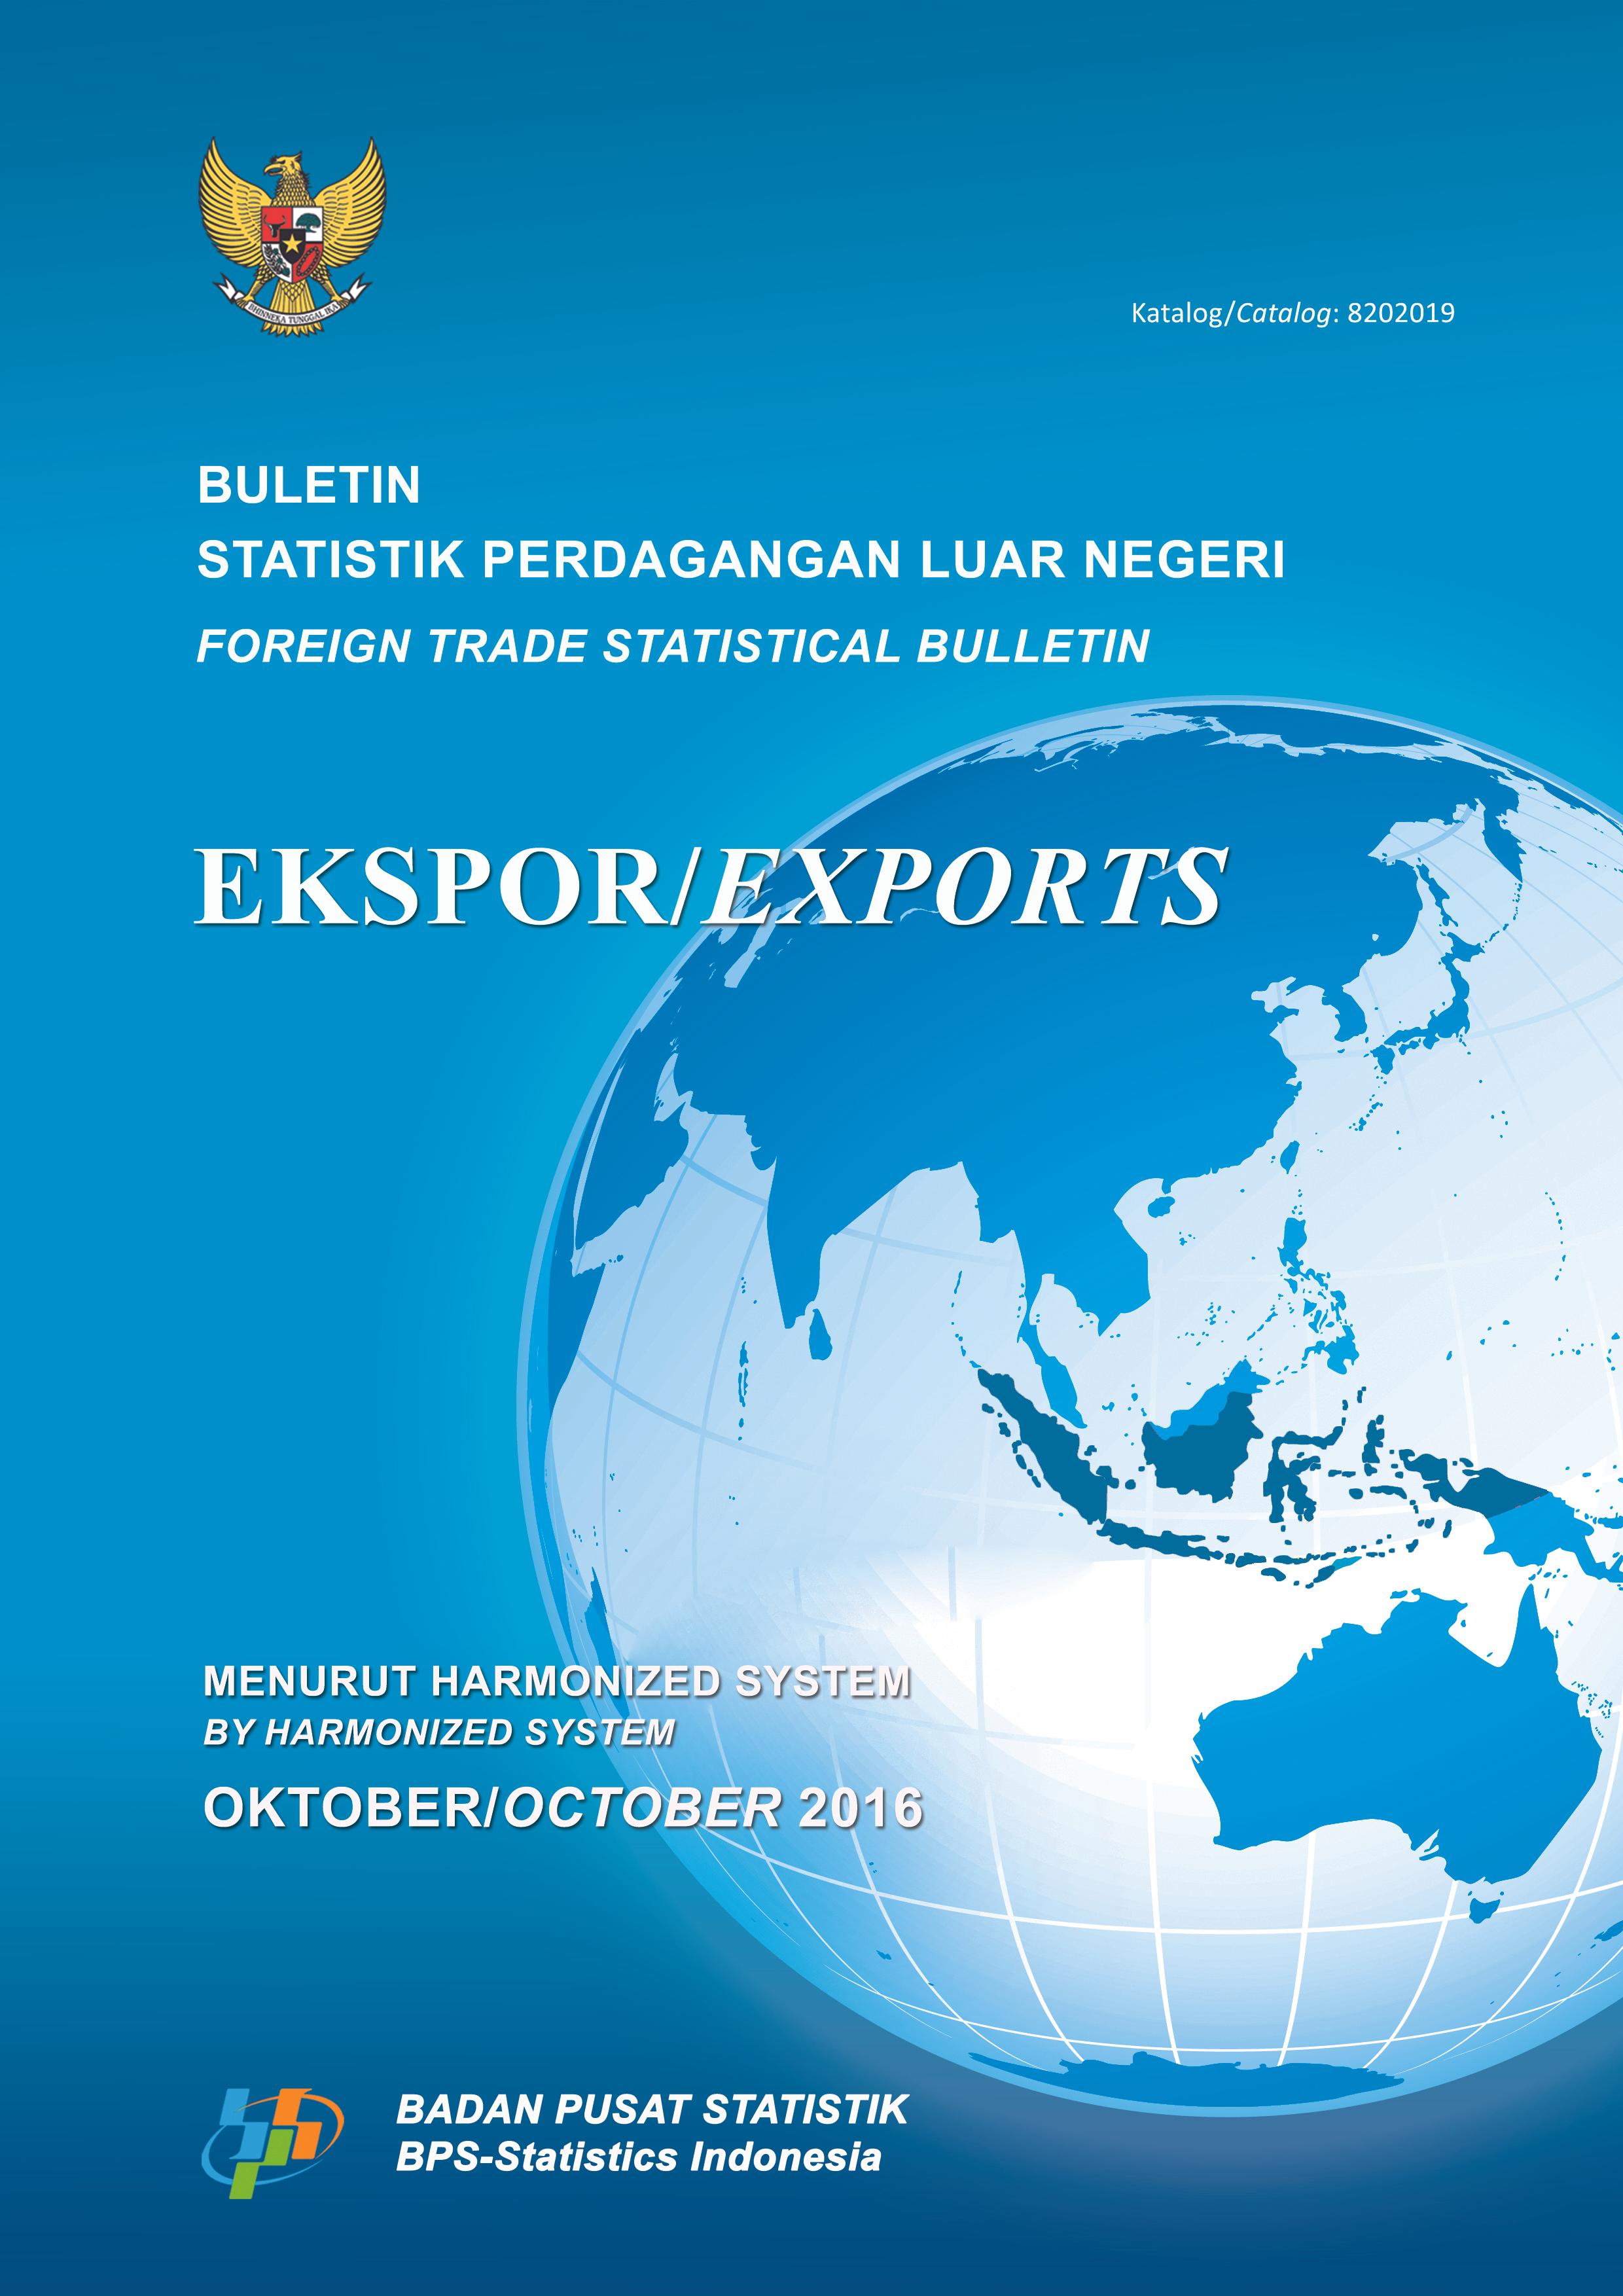 Foreign Trade Statistical Bulletin Exports by Harmonized System, October 2016